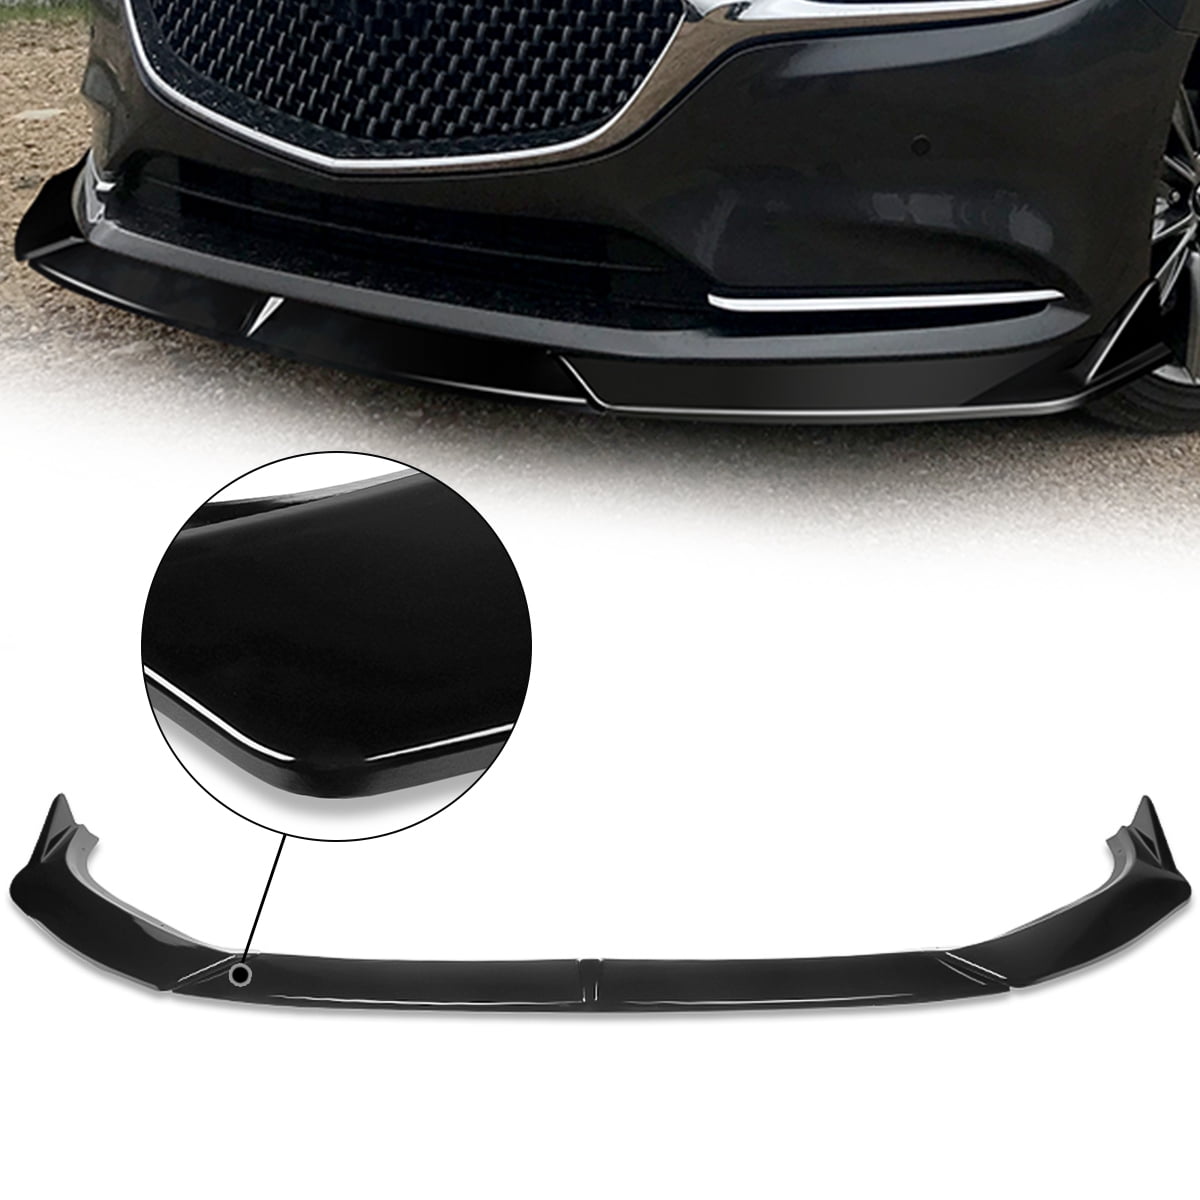 Stay Tuned Performance PU/681/PBK Painted Black Front Bumper Body Kit Lip 3PCS Compaitble with 2014-2018 Mazda3 Axela 